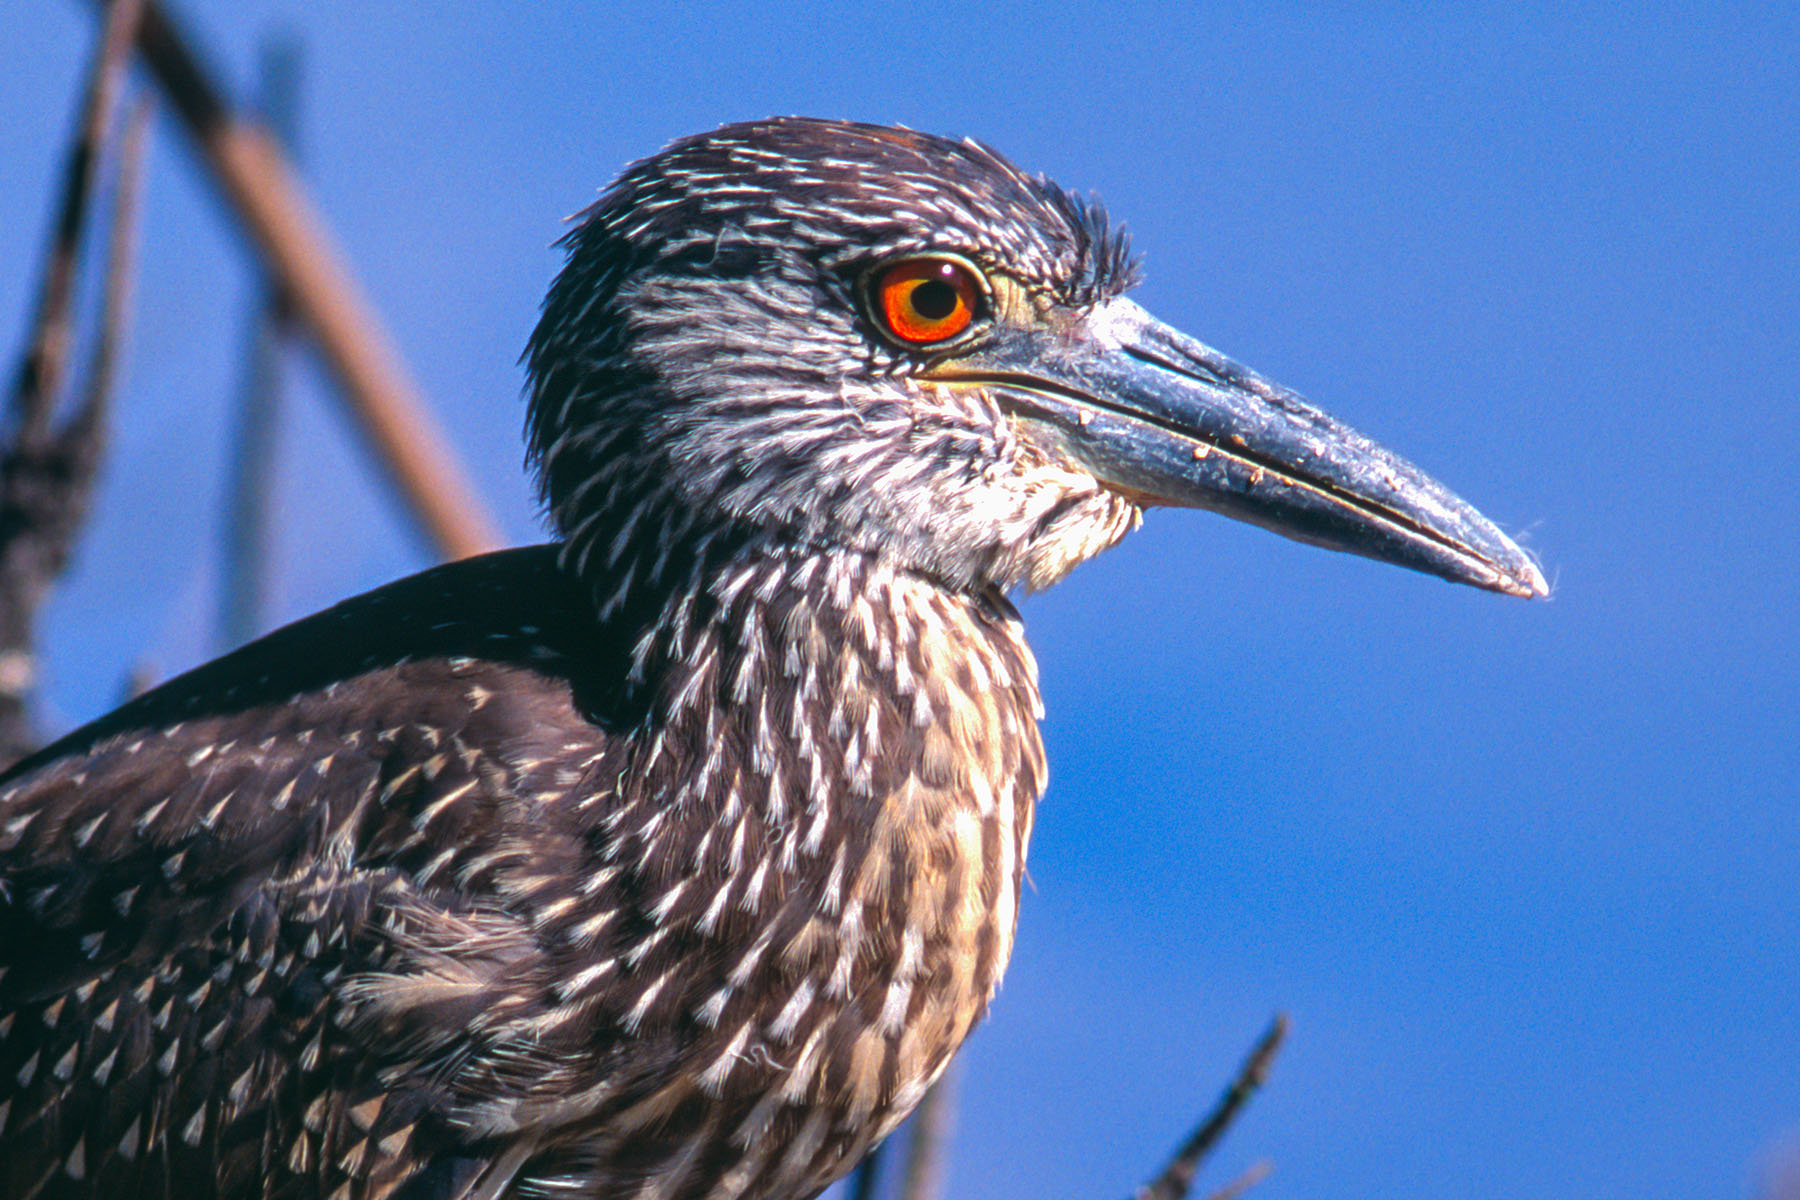 Yellow-crowned night heron, 'Ding' Darling National Wildlife Refuge, Florida.  Scanned from slide.  Click for next photo.